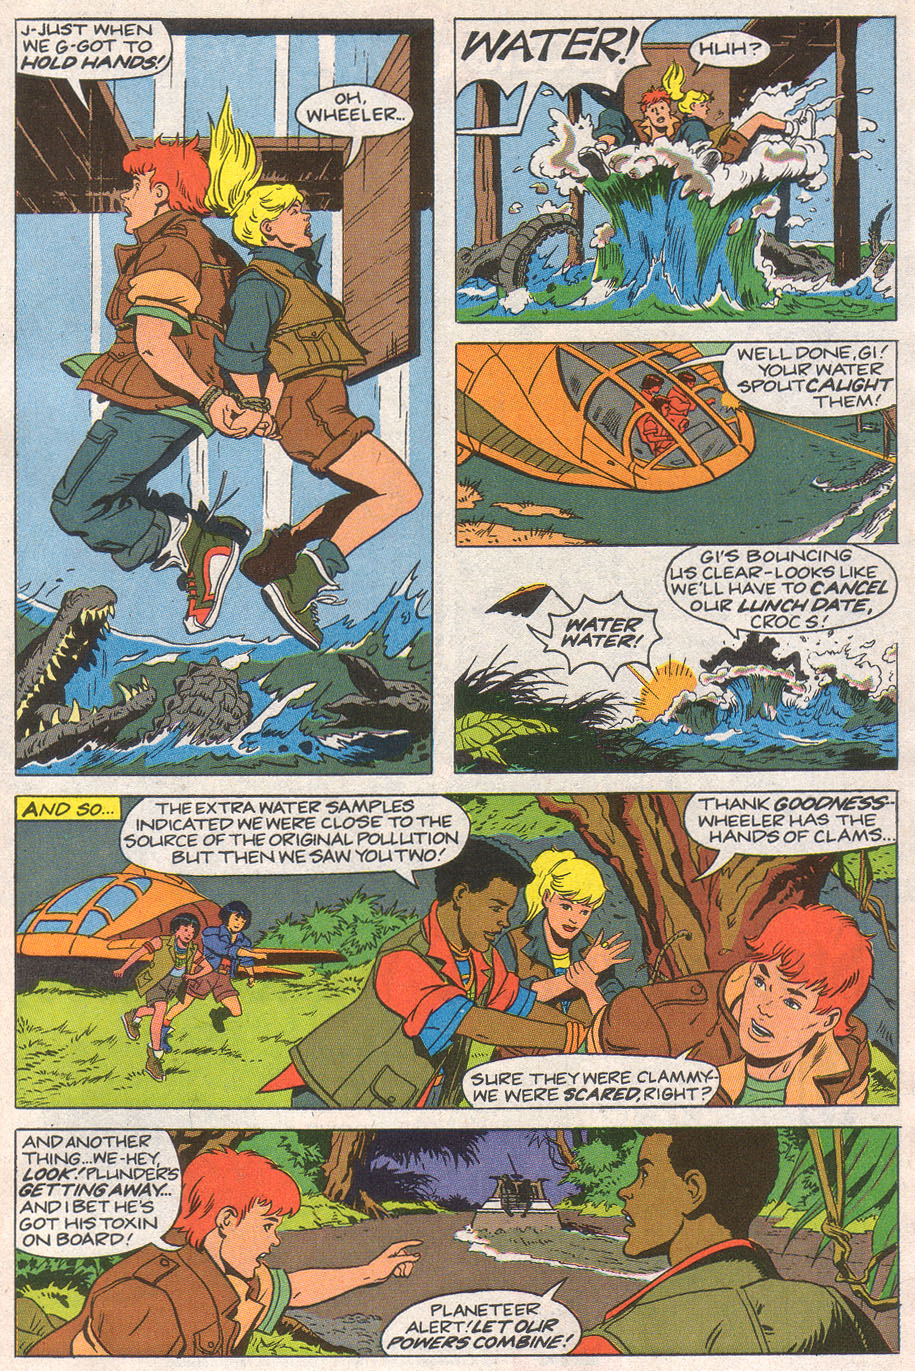 Captain Planet and the Planeteers 7 Page 28